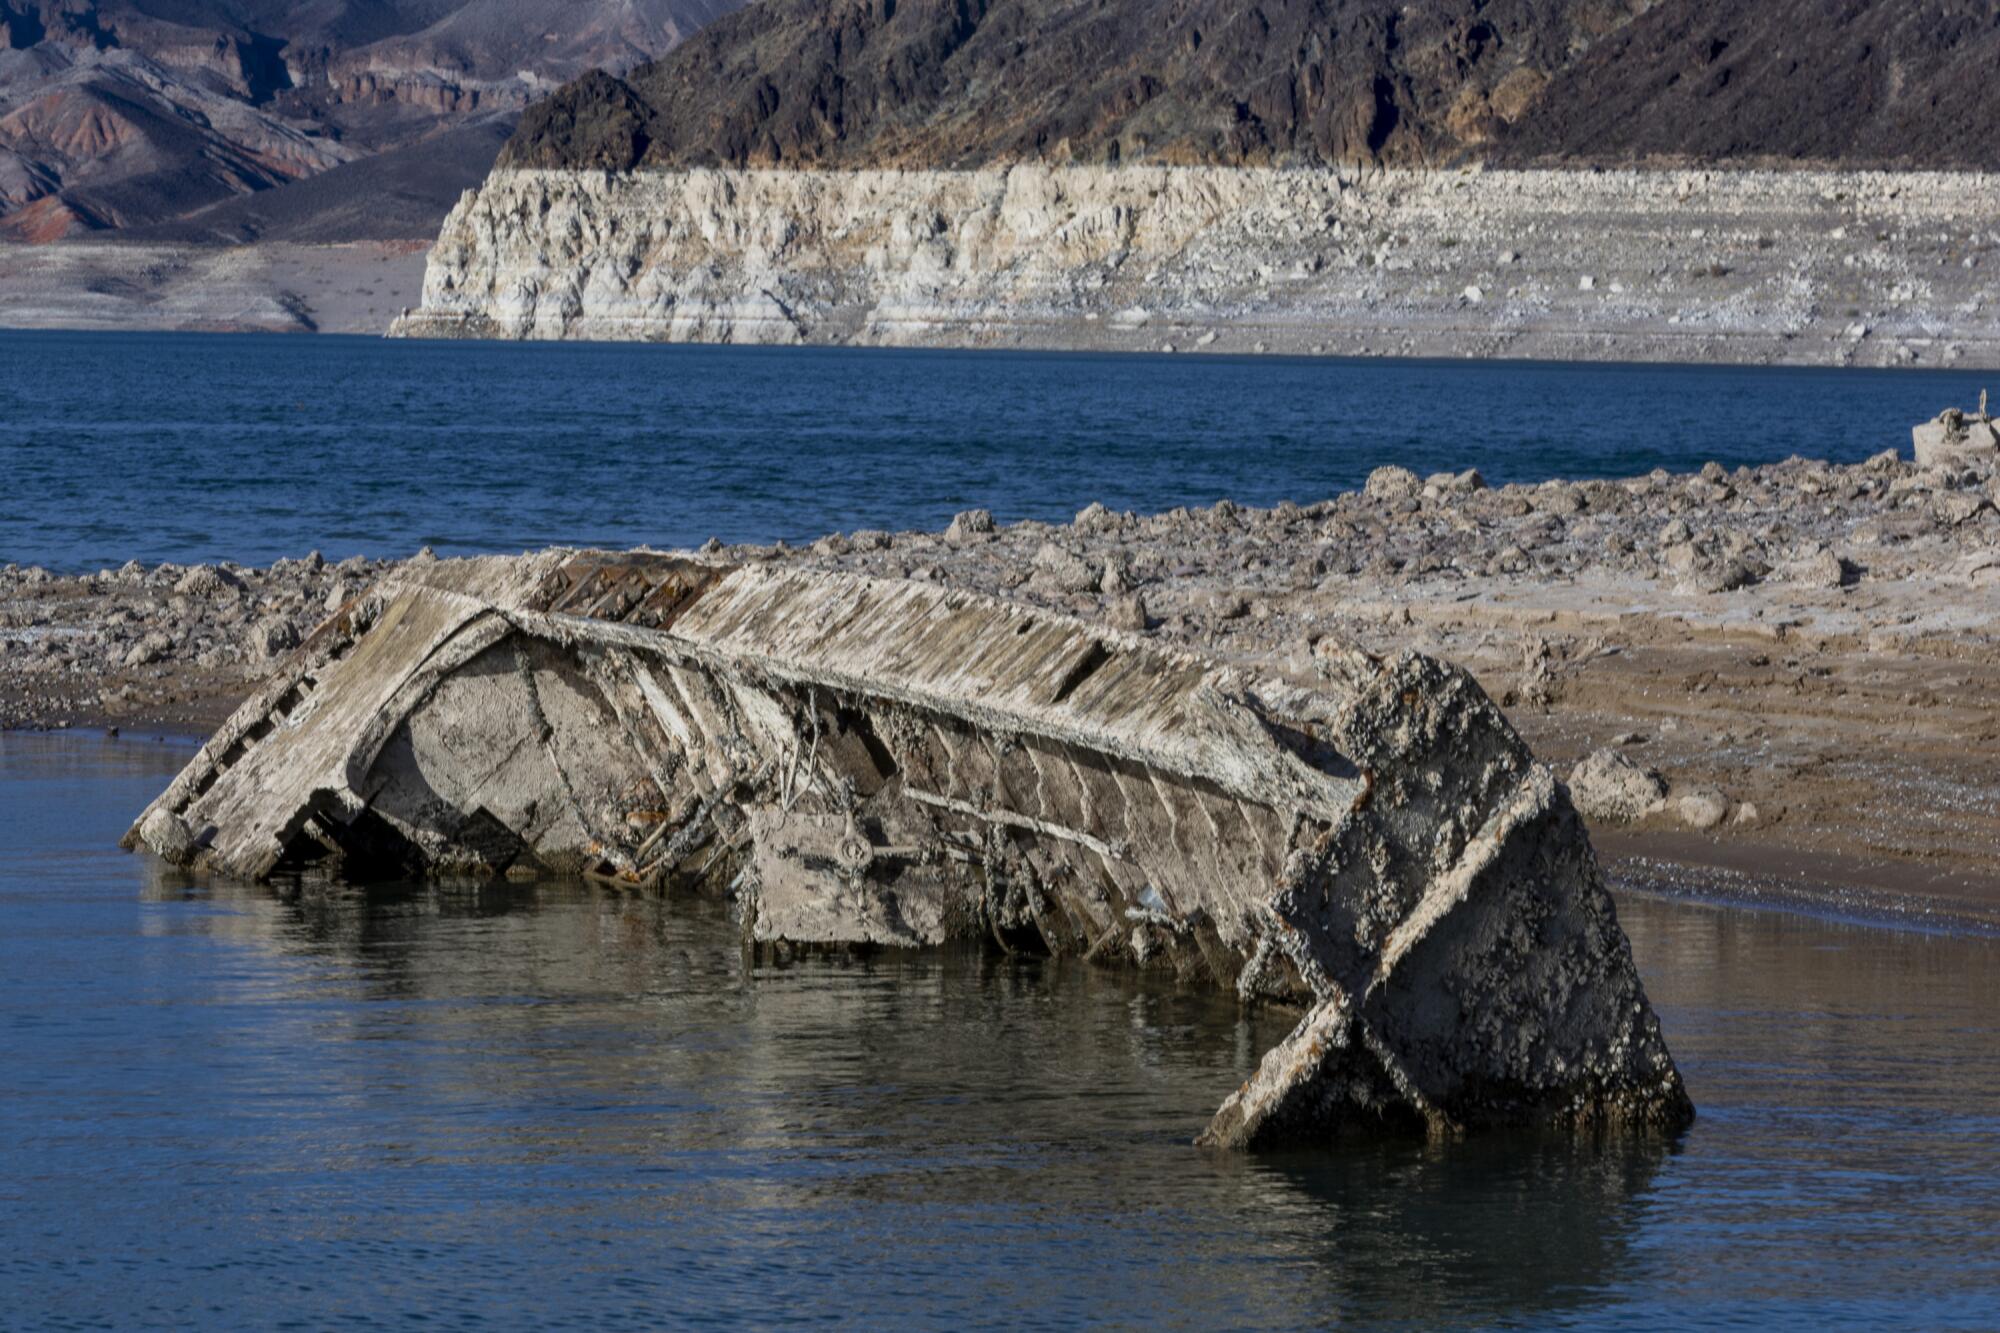 A WWII ear landing craft used to transport troops or tanks was revealed on the shoreline near the Lake Mead Marina.